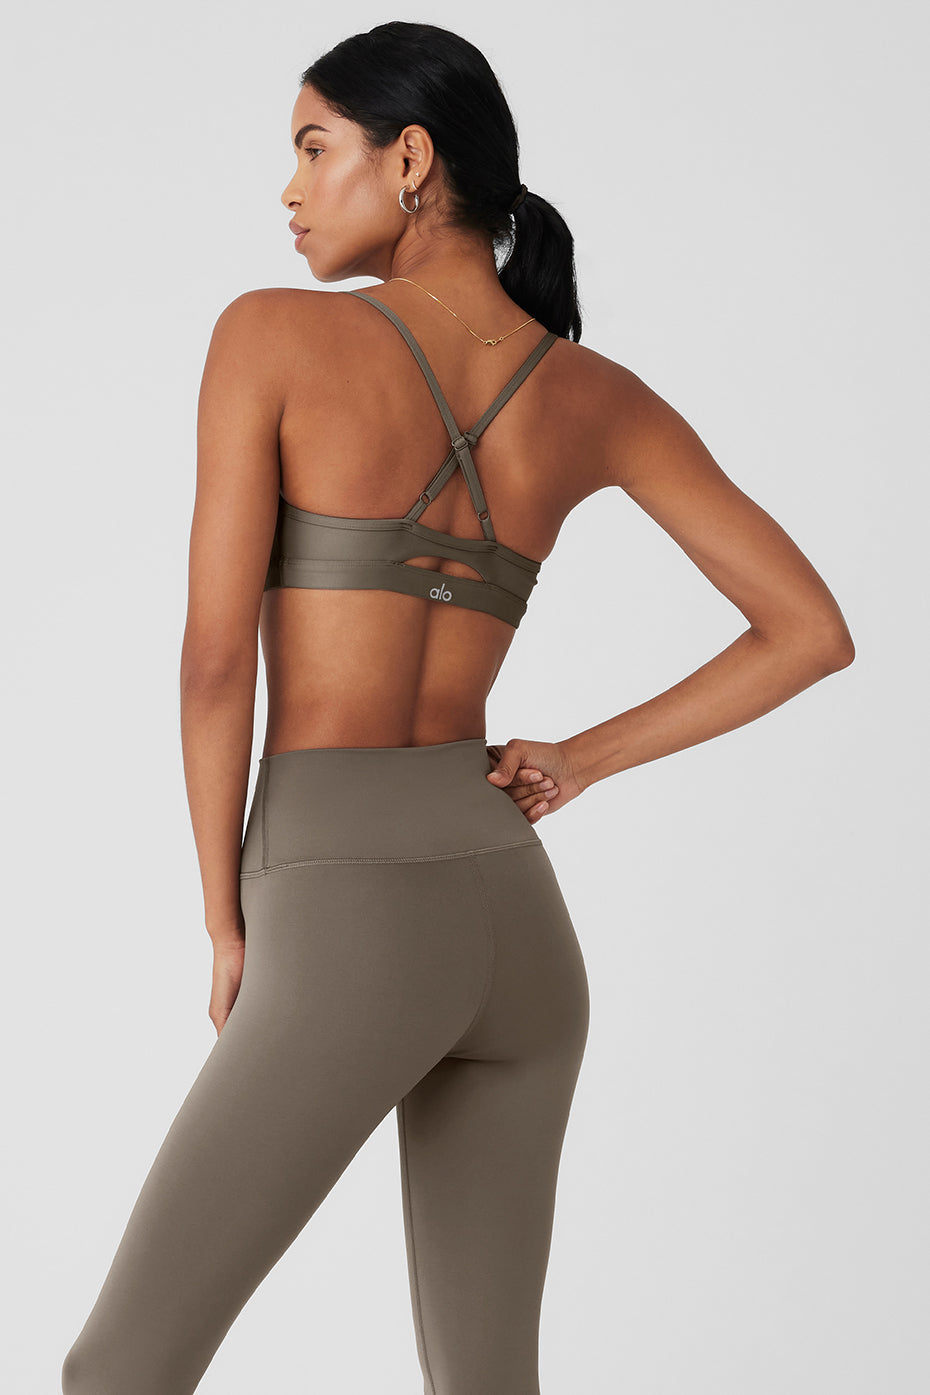 Airlift Intrigue Bra - Olive Tree